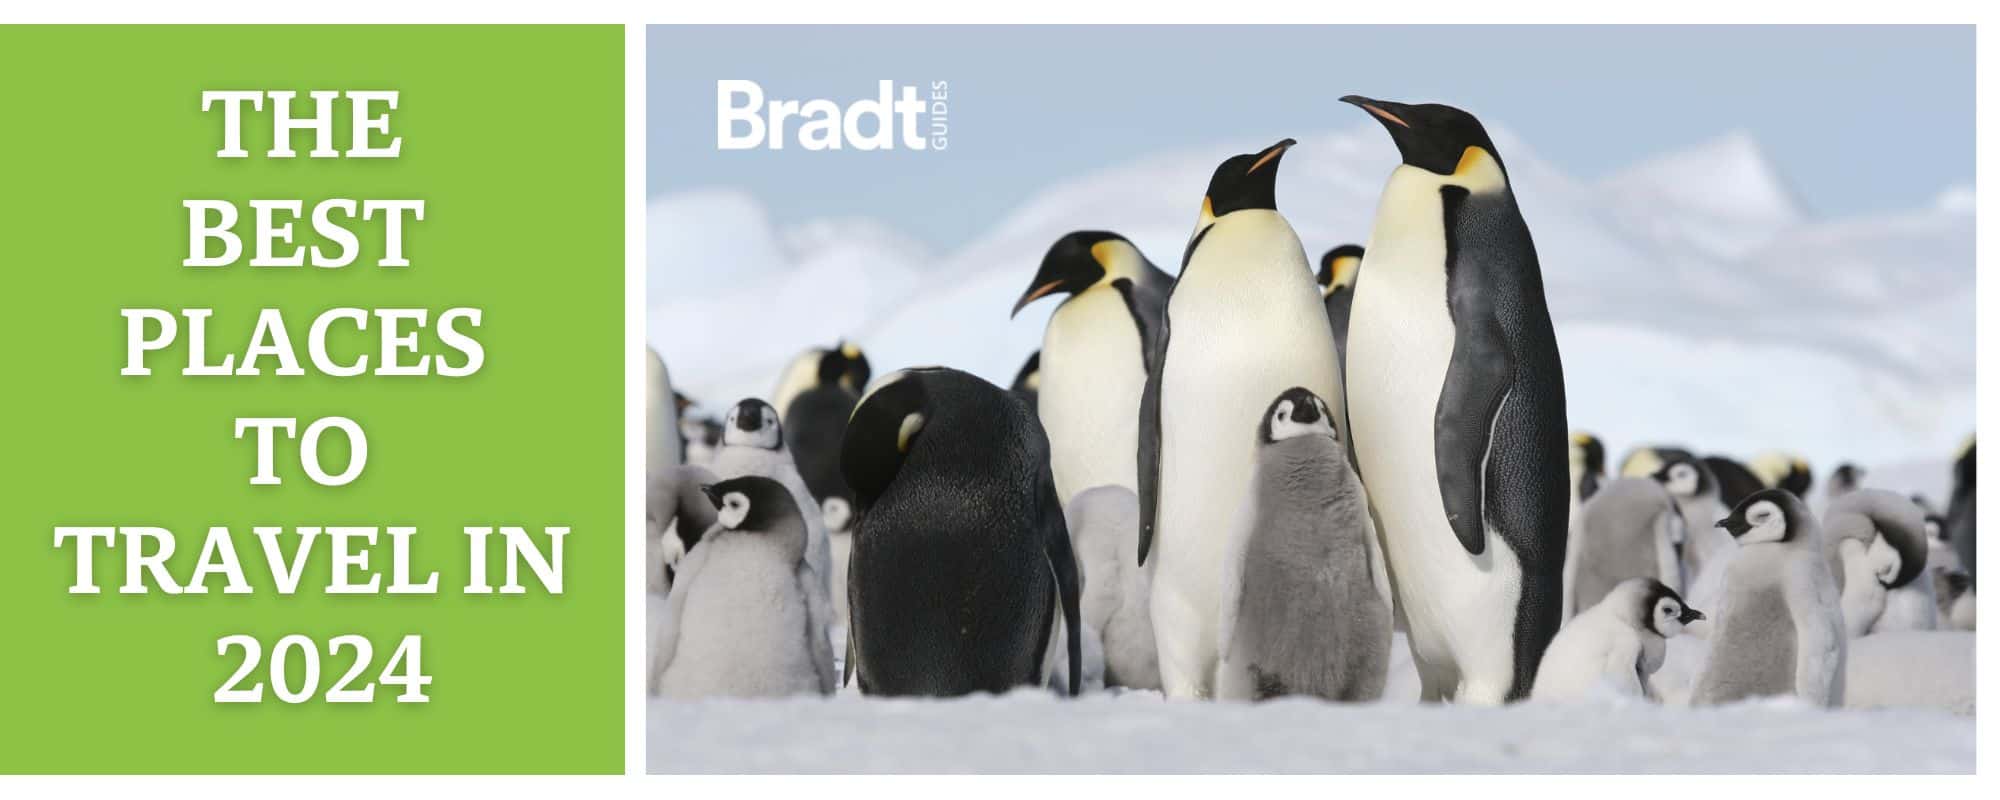 Proud penguins standing as the best places to travel in 2024